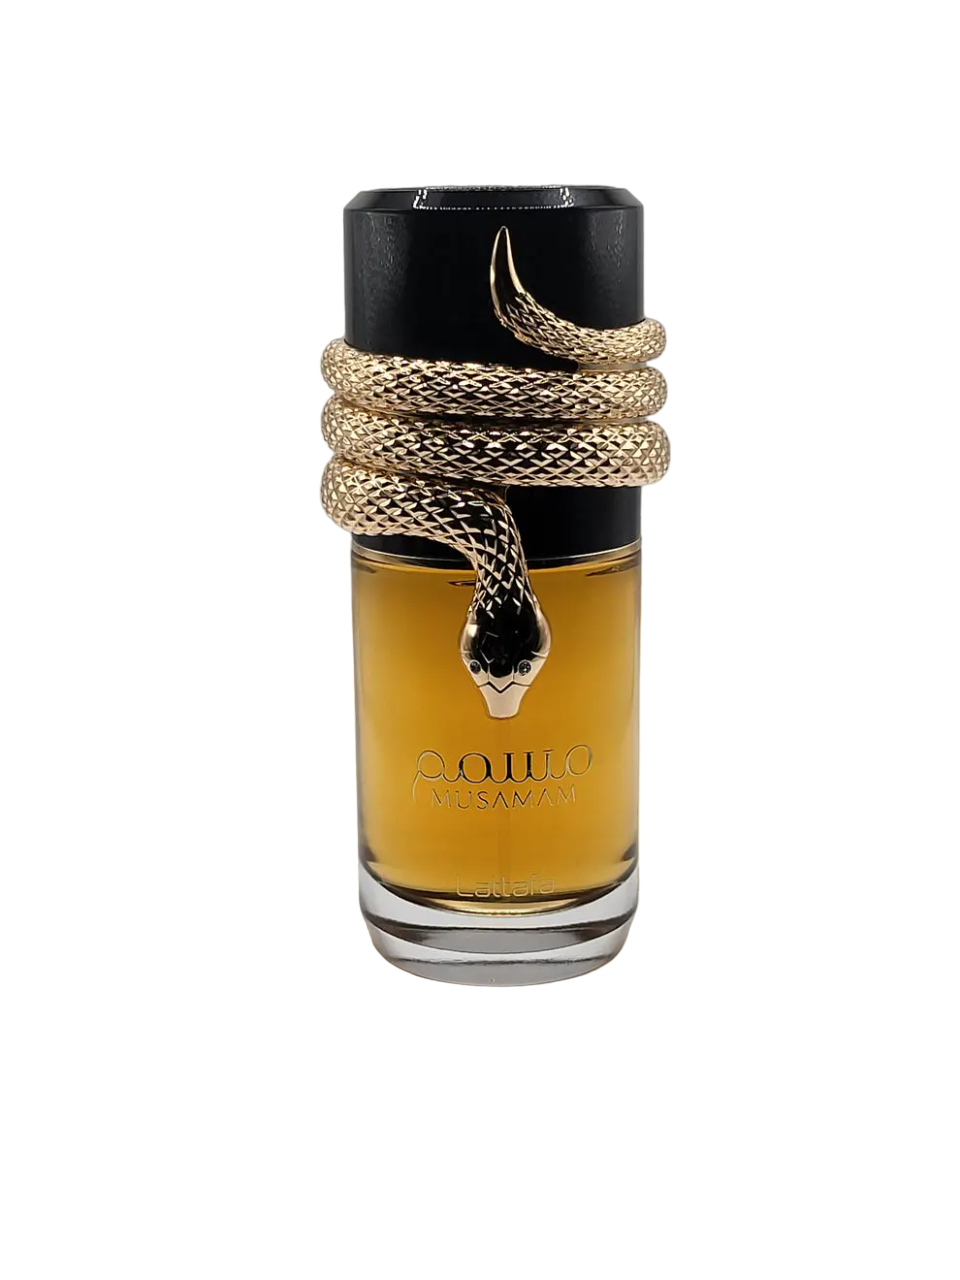 The image depicts a perfume bottle with the following details:  The bottle contains amber-colored liquid, suggesting the presence of perfume inside. It has a unique design featuring a thick, gold-colored rope wrapped around the neck of the bottle, ending with a tail-like design at the top. The cap of the bottle is black, contrasting with the gold rope design. The front of the bottle has the brand name in black, stylized font that reads "مسامم" (Musamam) and "Lattafa."